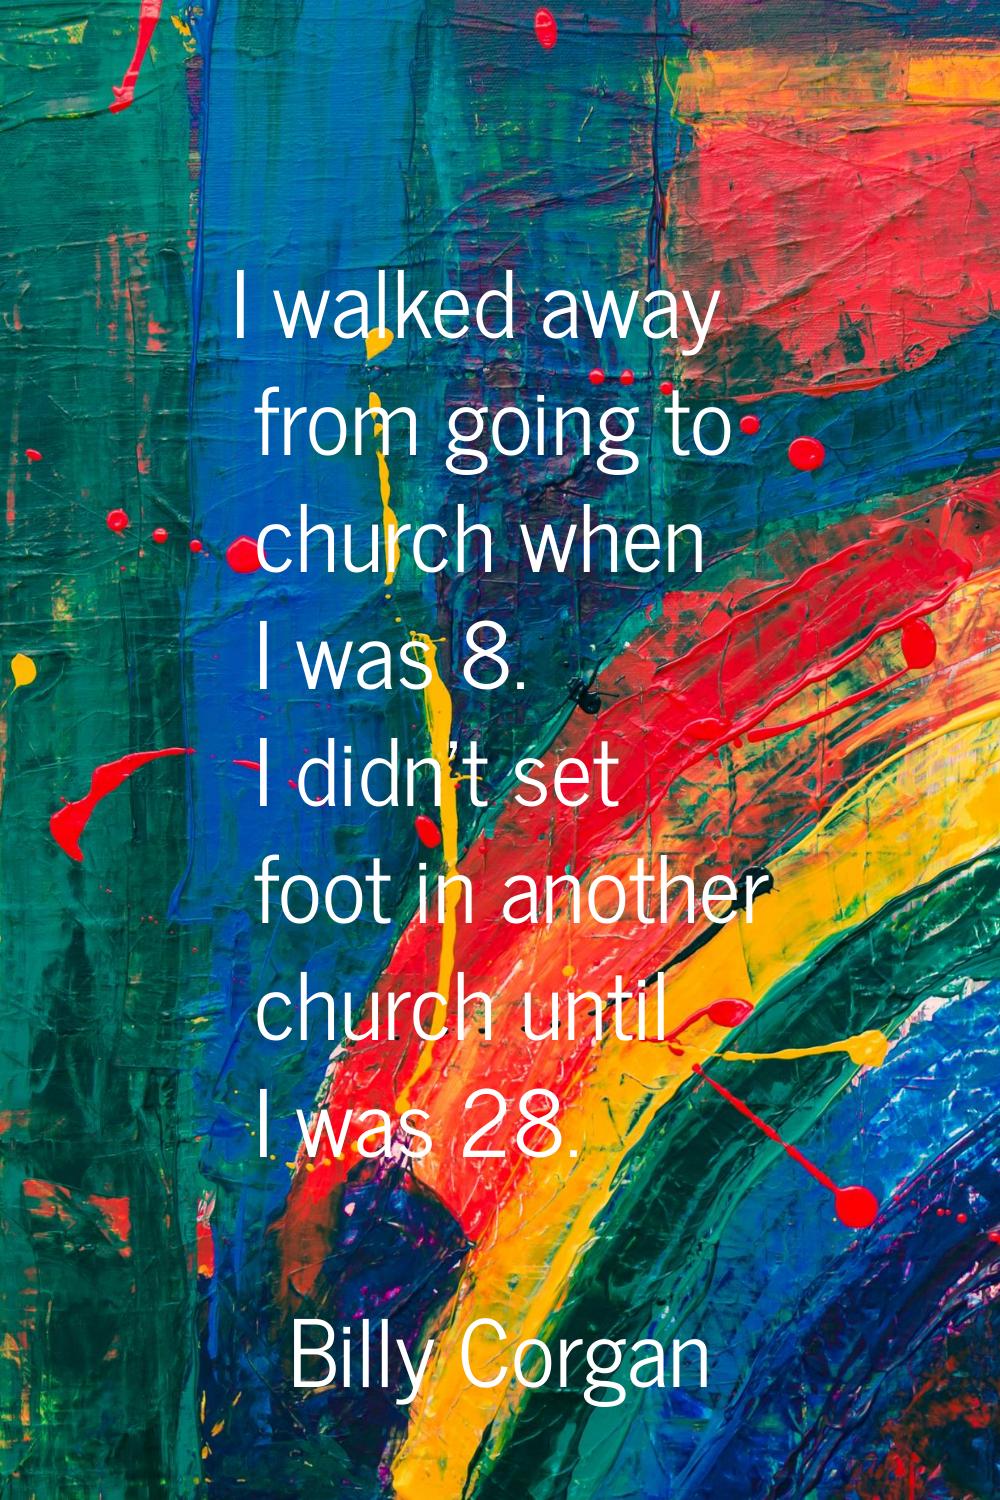 I walked away from going to church when I was 8. I didn't set foot in another church until I was 28